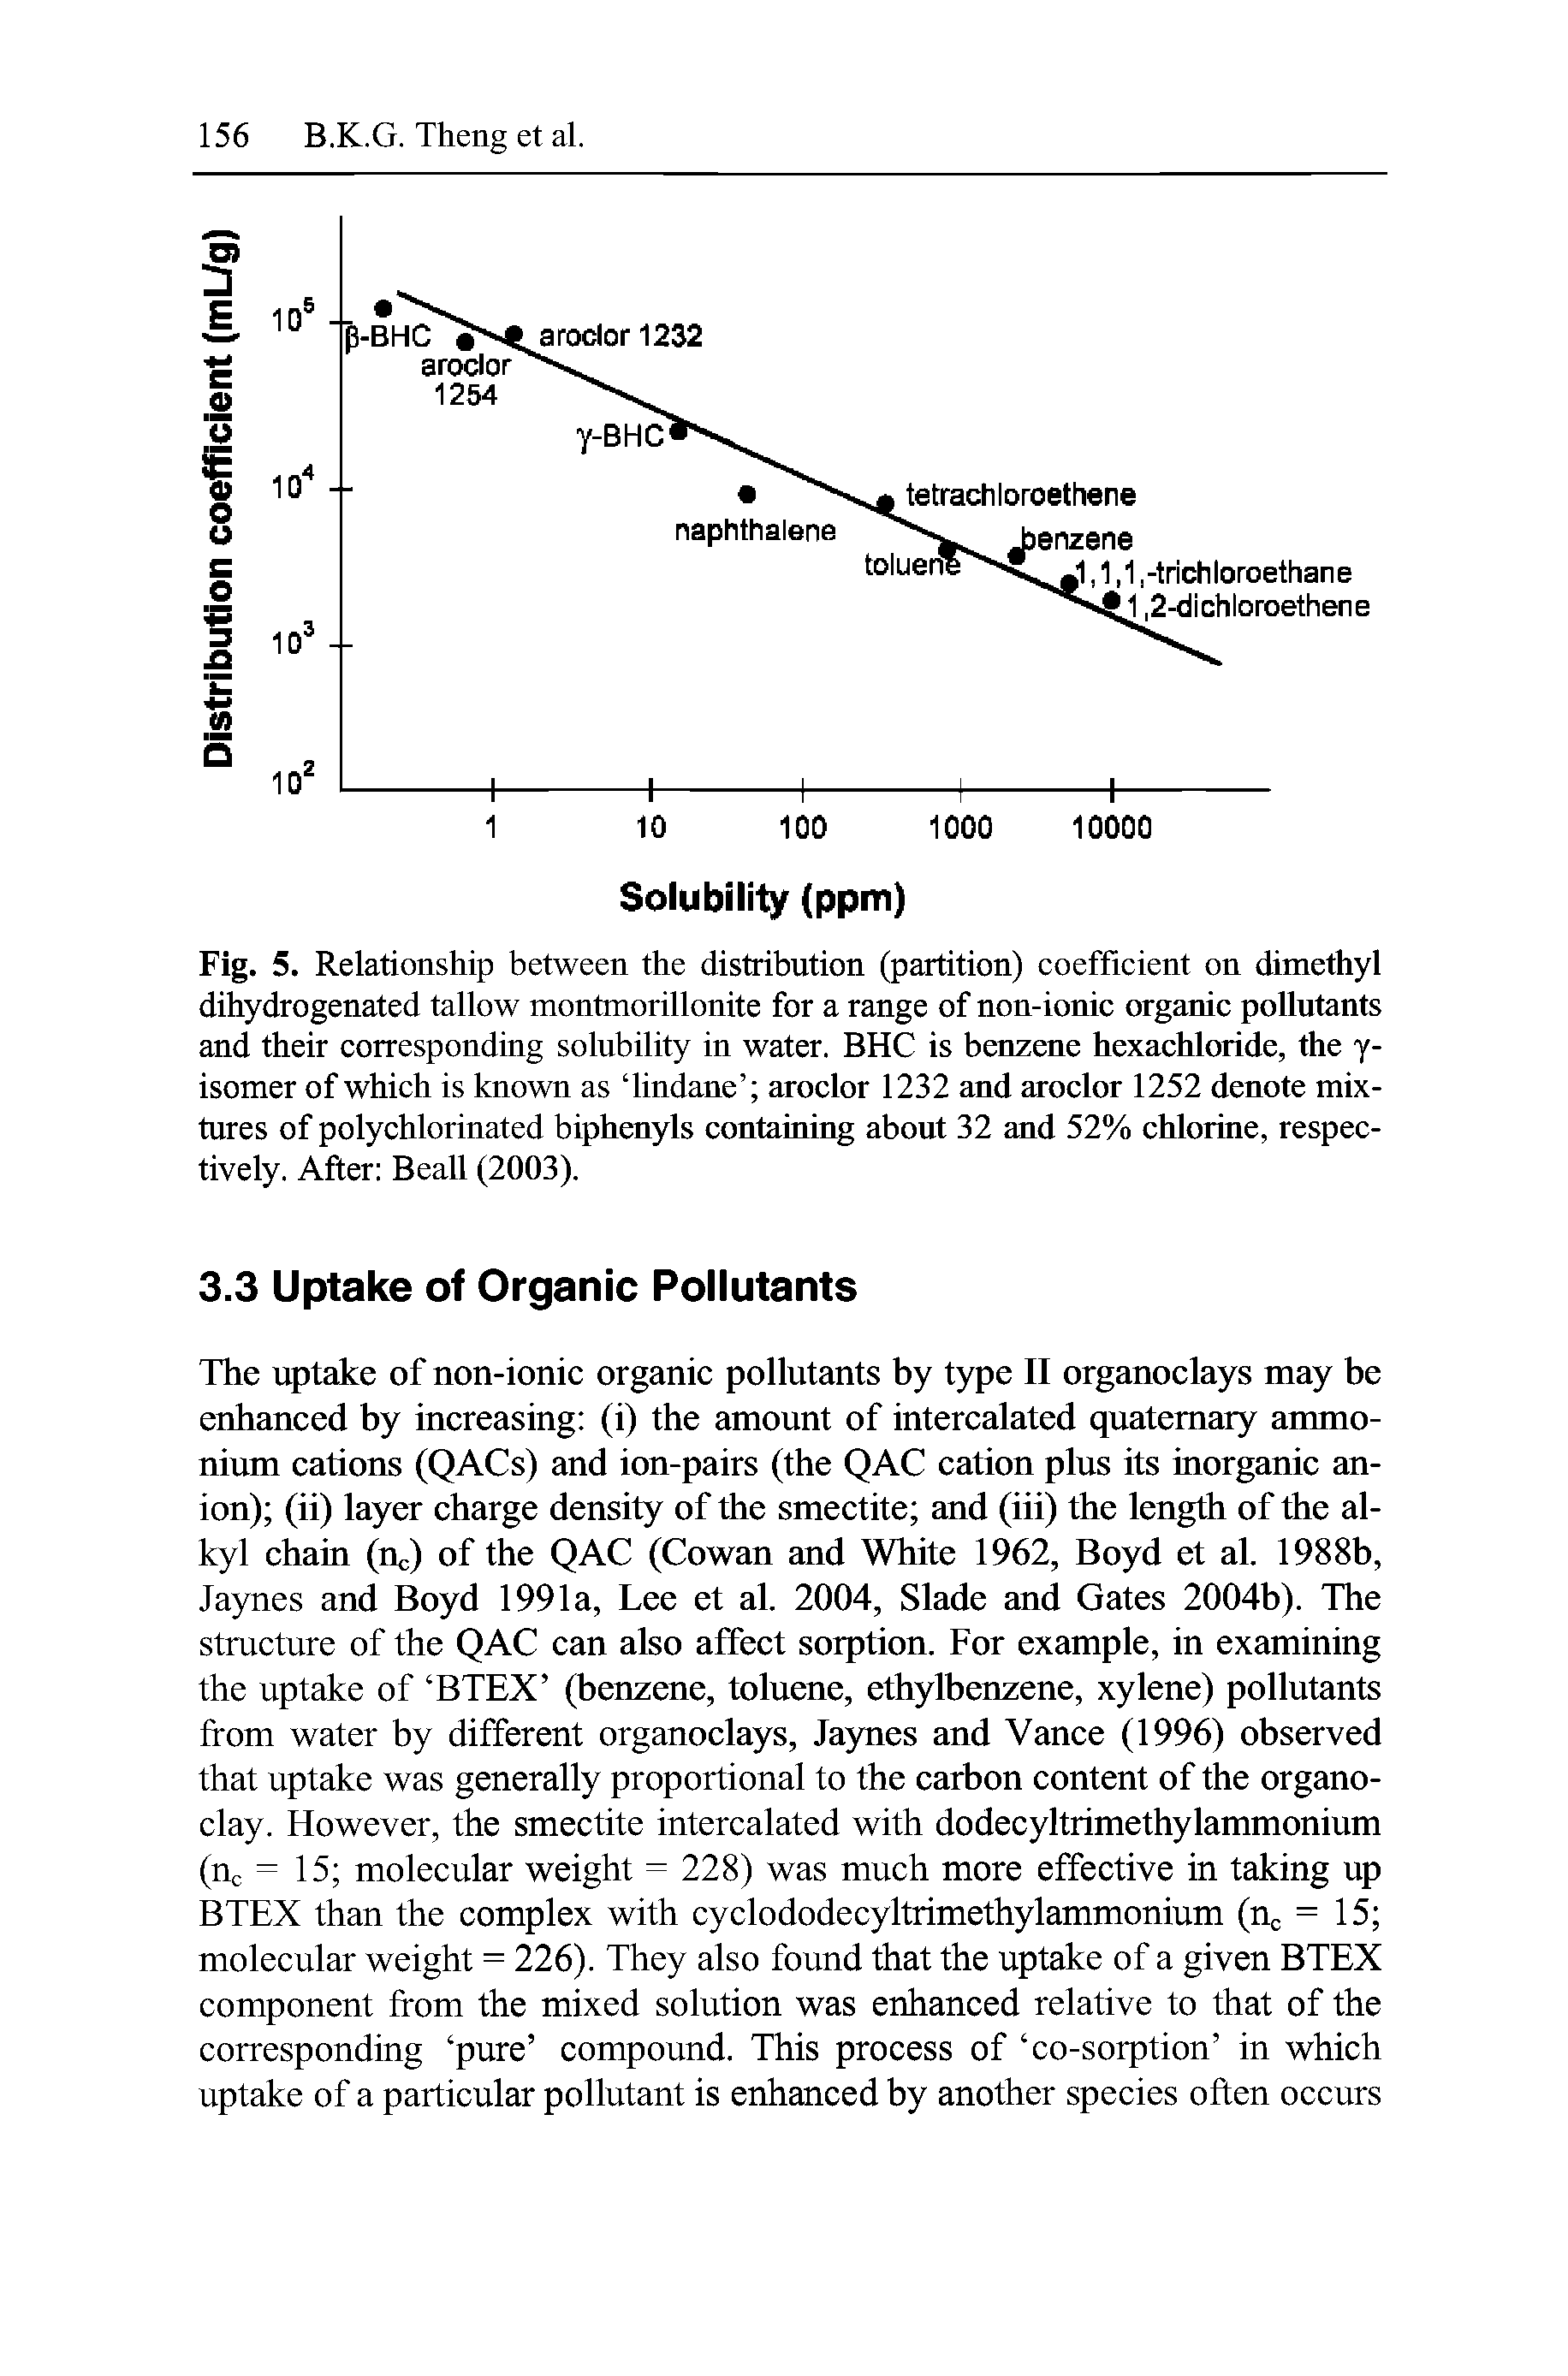 Fig. 5. Relationship between the distribution (partition) coefficient on dimethyl dihydrogenated tallow montmorillonite for a range of non-ionic organic pollutants and their corresponding solubility in water. BHC is benzene hexachloride, the y-isomer of which is known as lindane aroclor 1232 and aroclor 1252 denote mixtures of polychlorinated biphenyls containing about 32 and 52% chlorine, respectively. After Beall (2003).